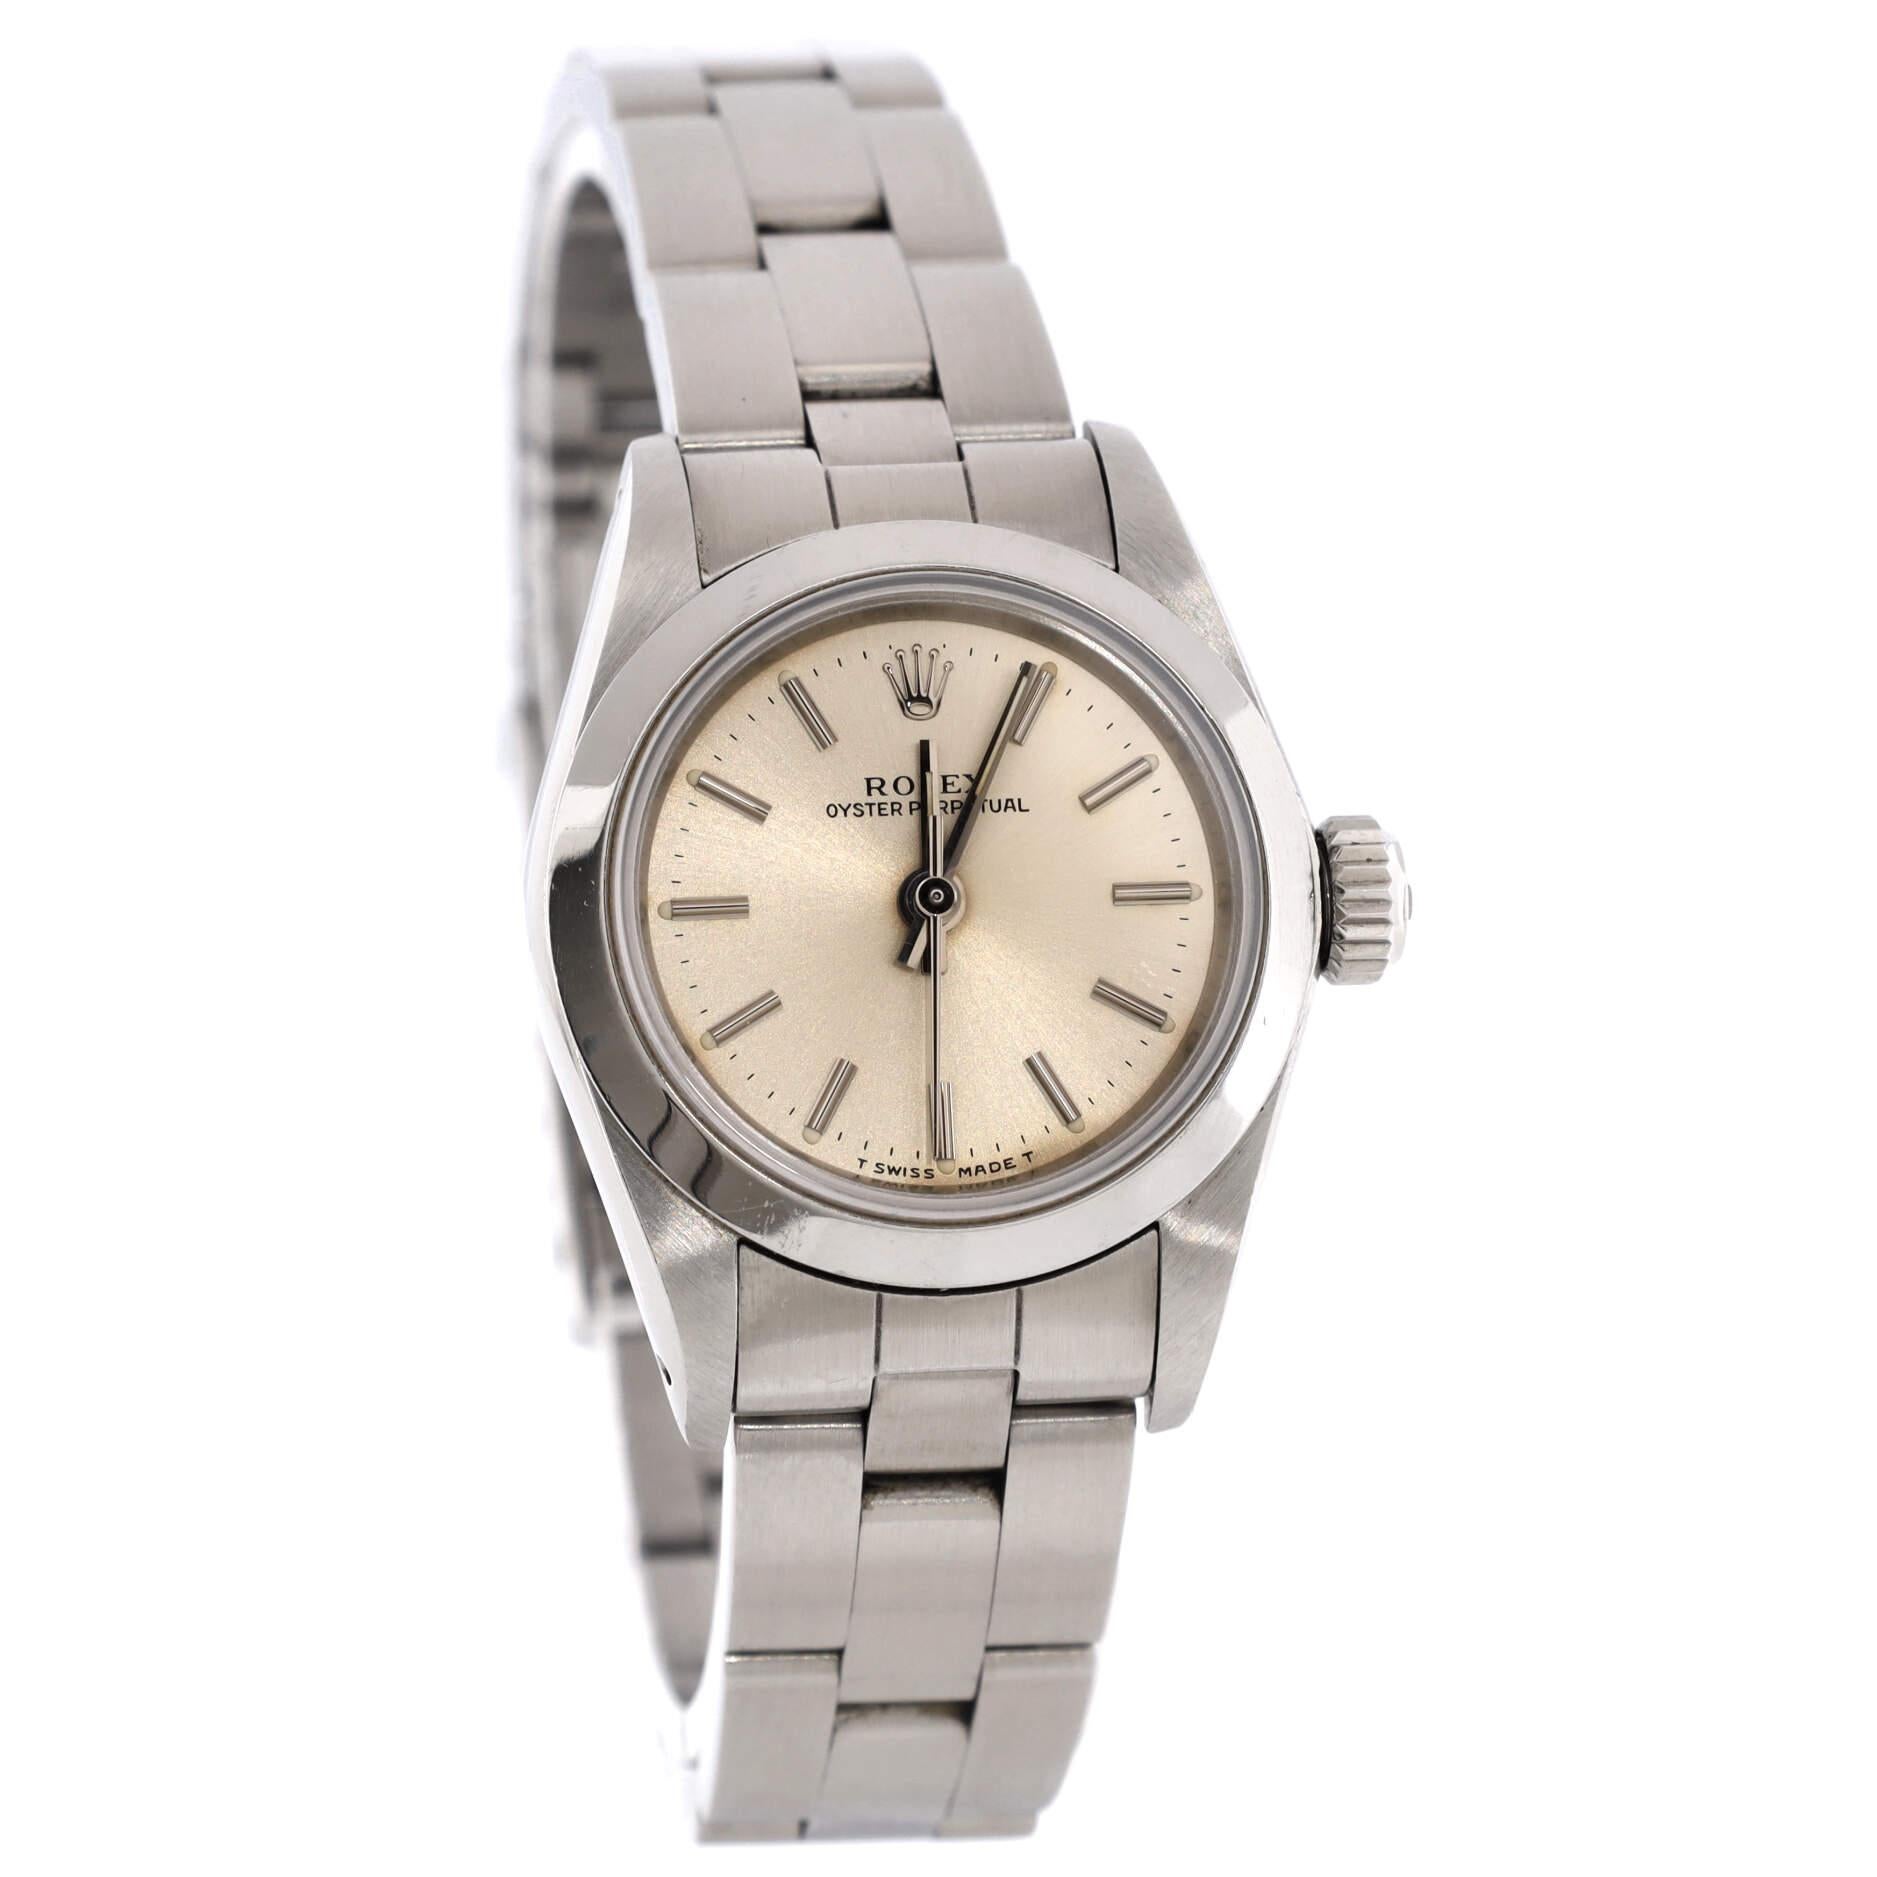 Condition: Great. Moderate scratches and wear throughout. Wear and scratches on case and bracelet.
Accessories: No Accessories
Measurements: Case Size/Width: 26mm, Watch Height: 9mm, Band Width: 13mm, Wrist circumference: 5.75